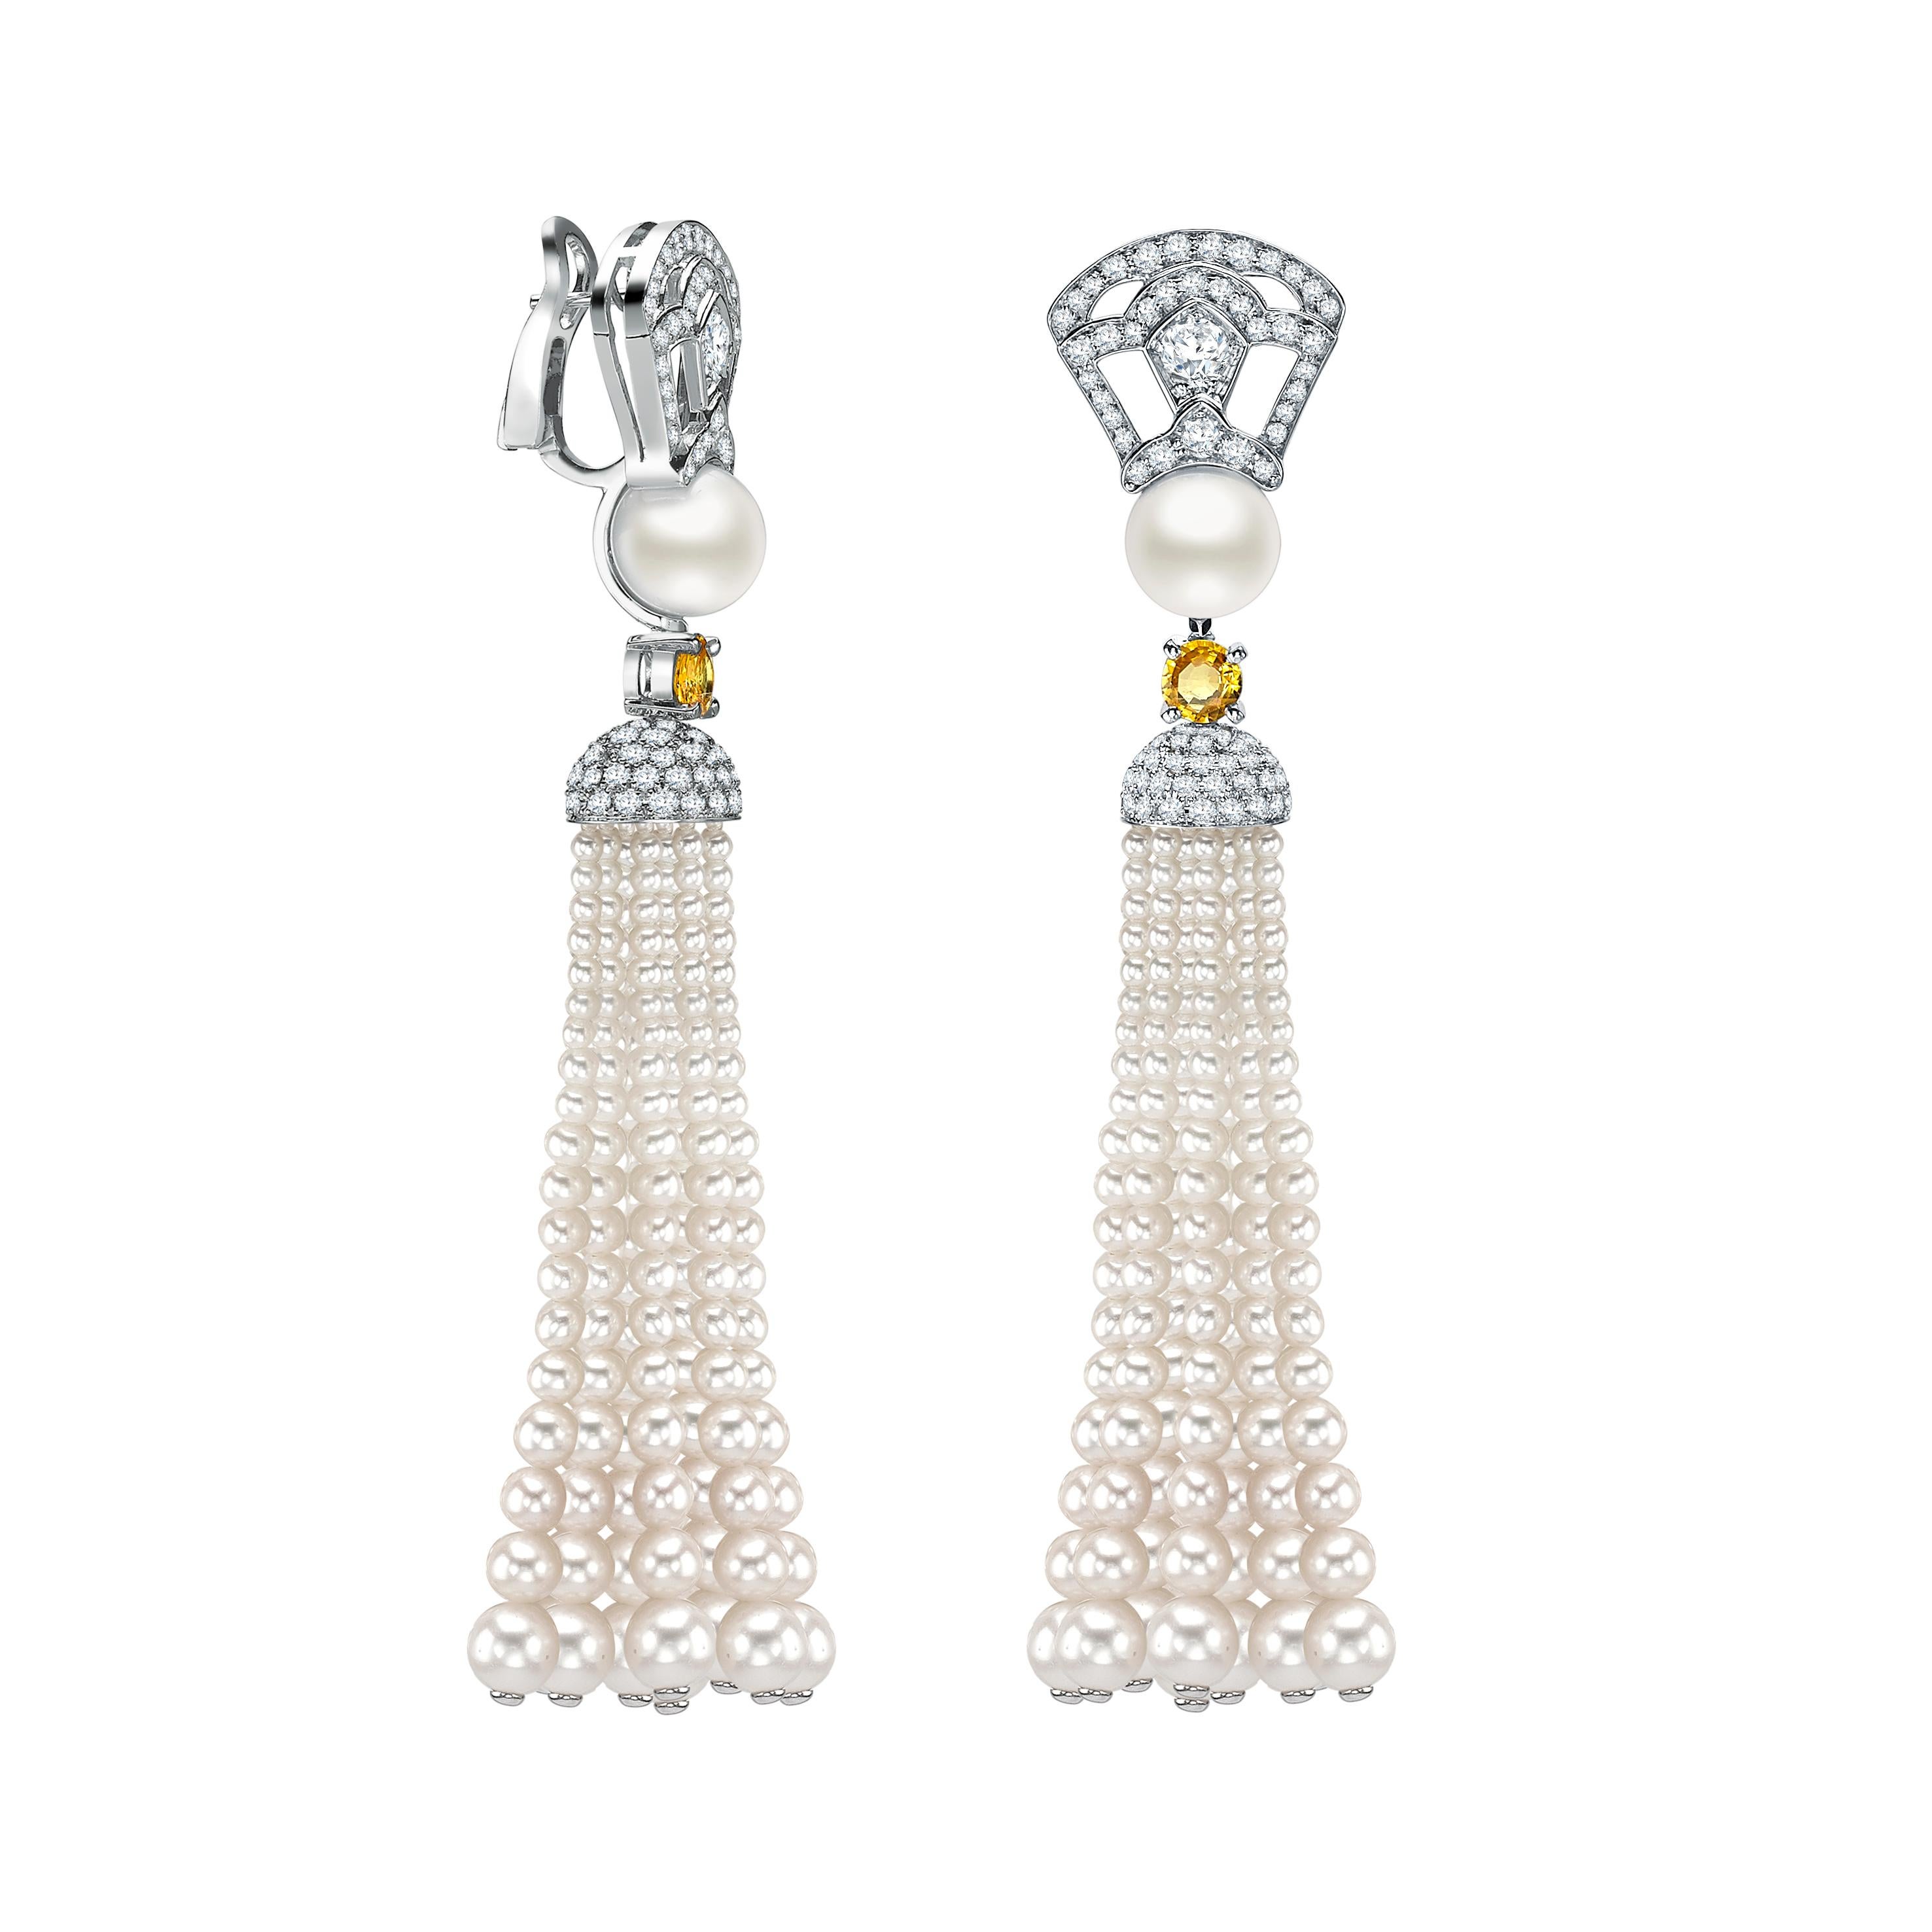 The perfect bridal gift that is beautiful and elegant. 
A pair of 18 karat white gold tassel earrings from the House of Garrard set with two yellow sapphires weighing 0.94 carats, 212 round white diamonds weighing 2.68 carats and 271 freshwater